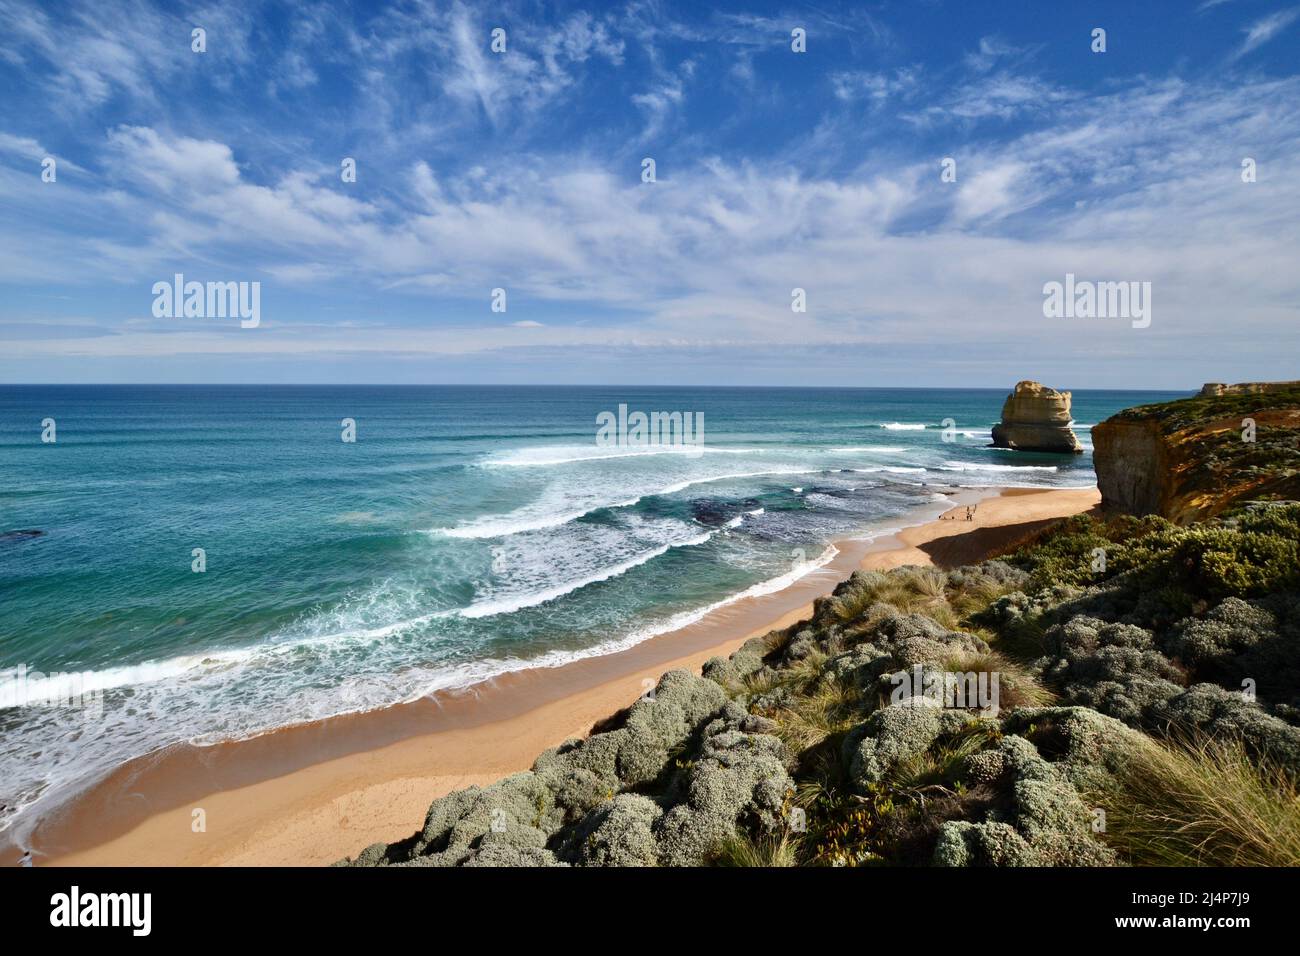 Panoramic view of the Victorian coastline in Australia on the Great Ocean Road showing wild surf and waves with pristine sandy beach and coastal scrub Stock Photo